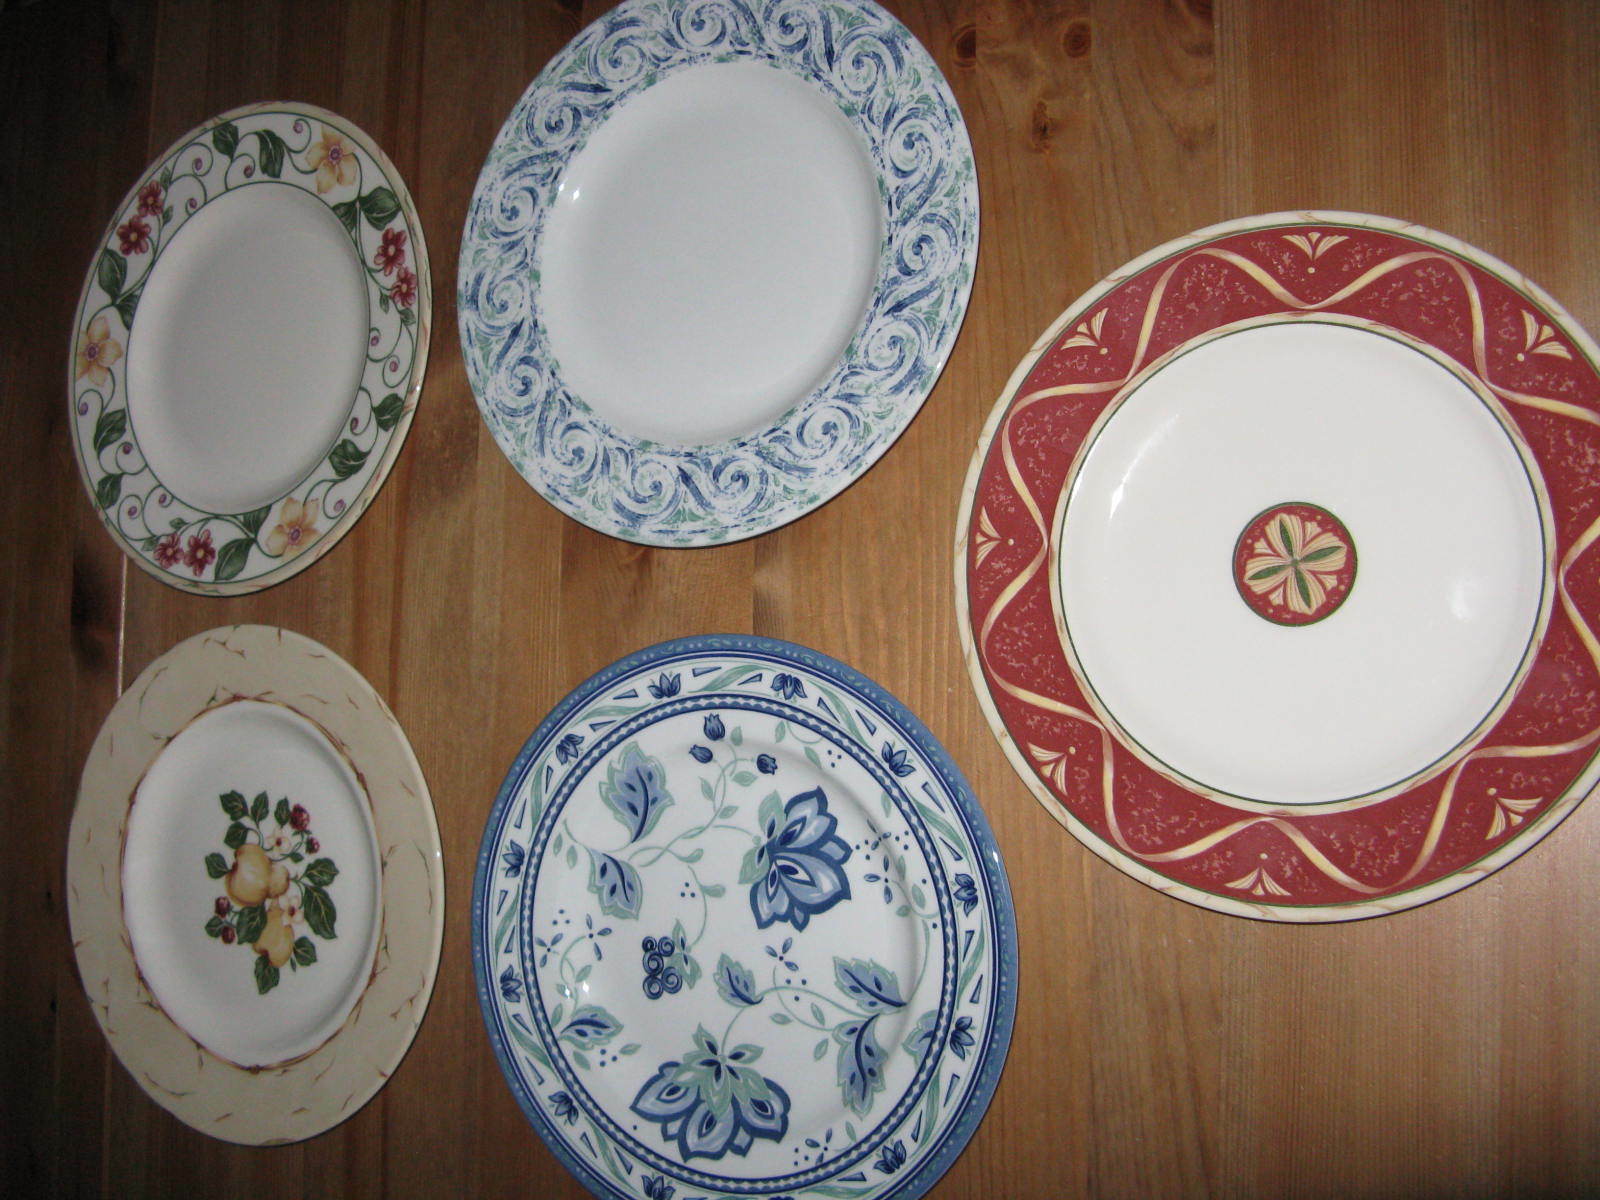 5 Wedgwood Home Amway 9" Luncheon Plates Different Designs